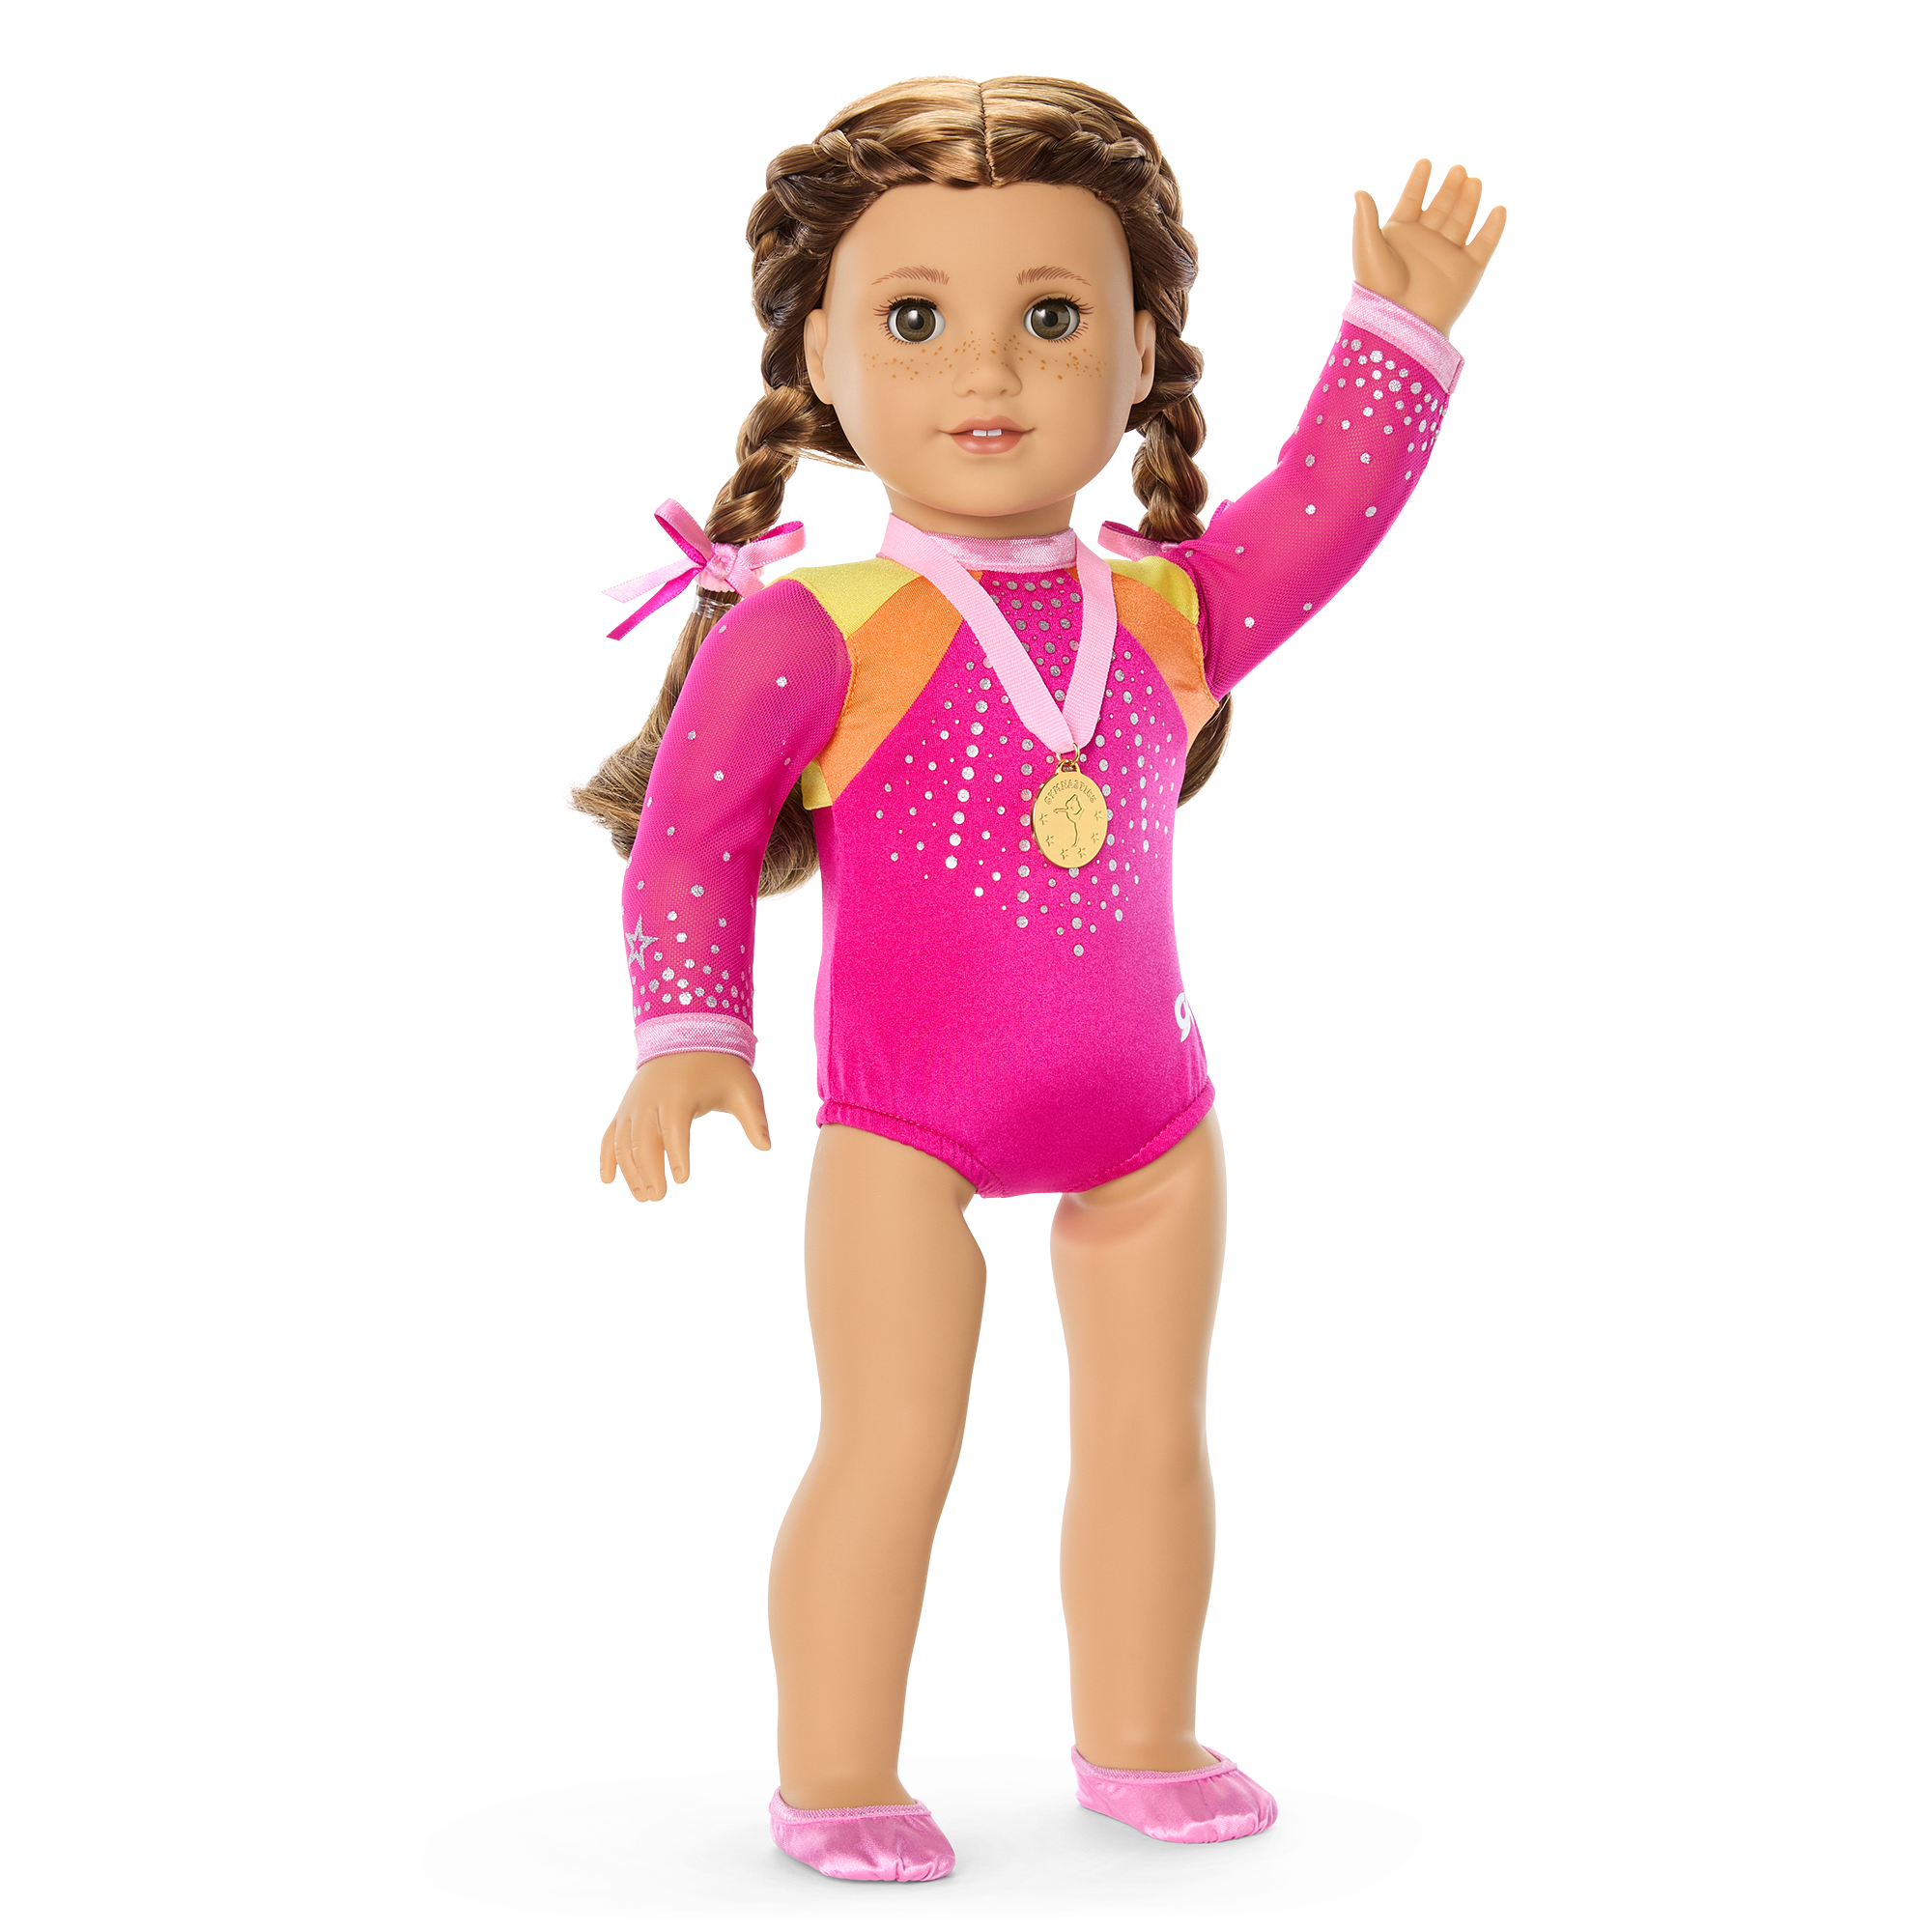 Lila's™ Gymnastics Competition Outfit